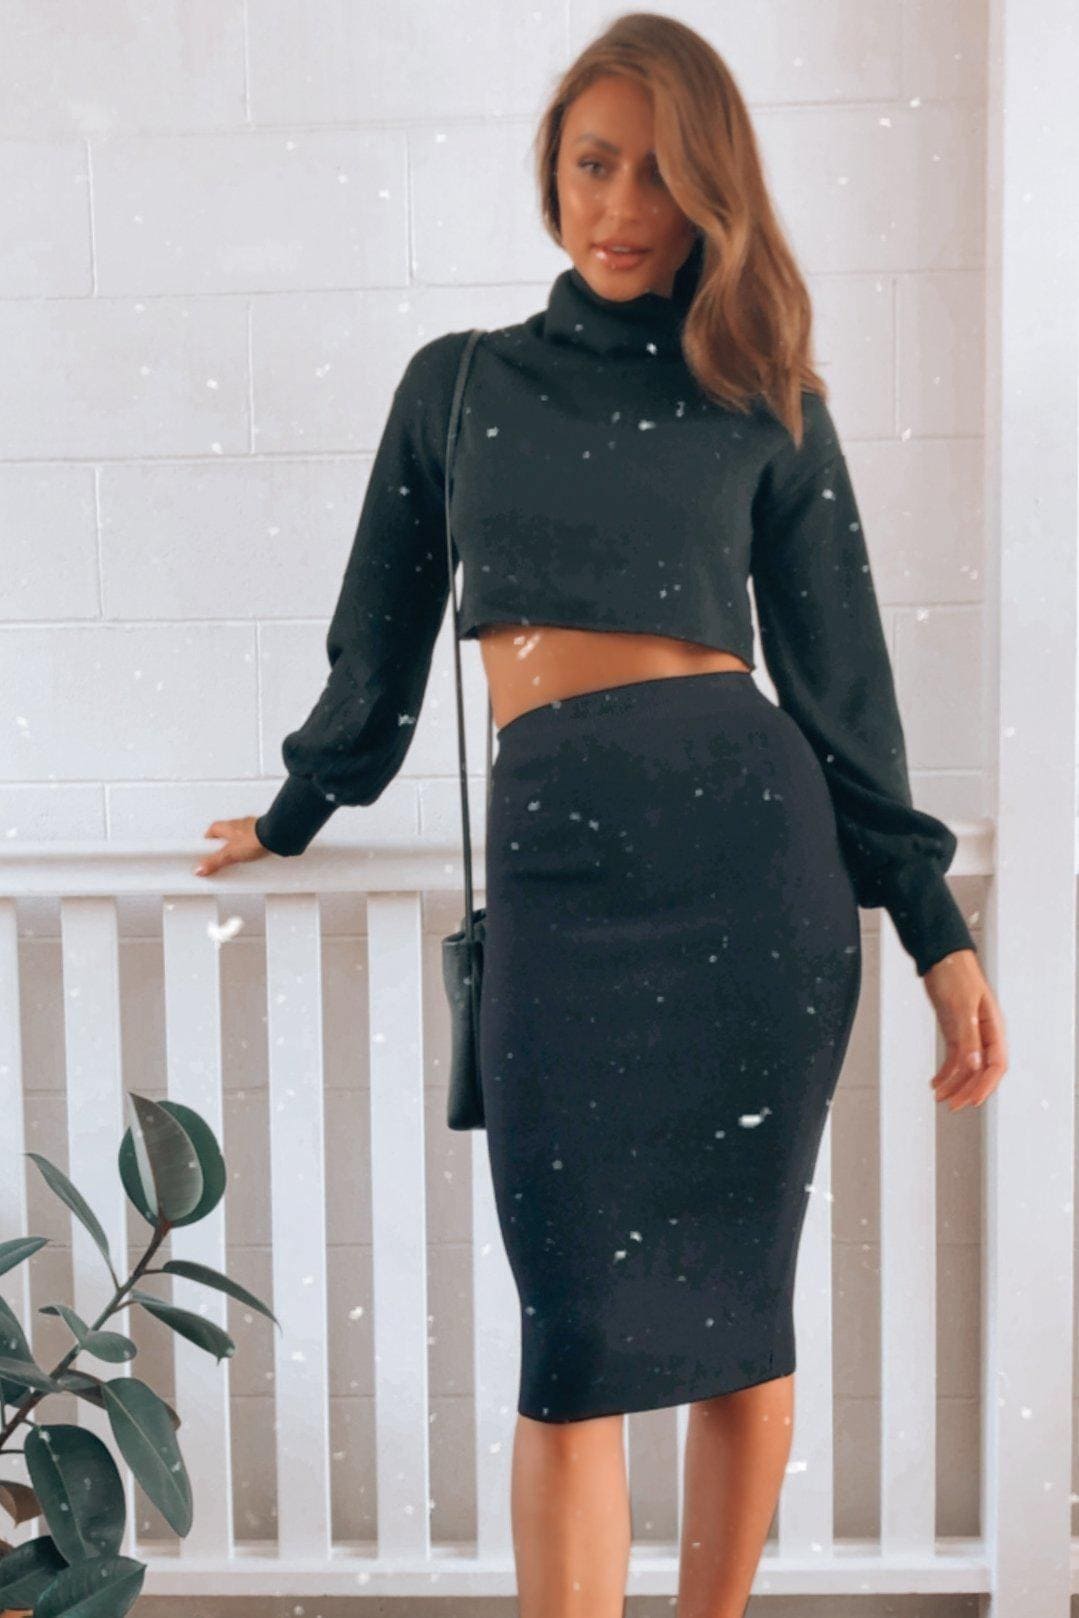 All About You Top, BASICS, BLACK, CROP TOP, CROP TOPS, LONG SLEEVE, Sale, TOPS, Our New All About You Top Is Now Only $49.00 Exclusive At Mishkah, Our New All About You Top is now only $49.00-We Have The Latest Women&#39;s Tops @ Mishkah Online Fashion Boutique-MISHKAH